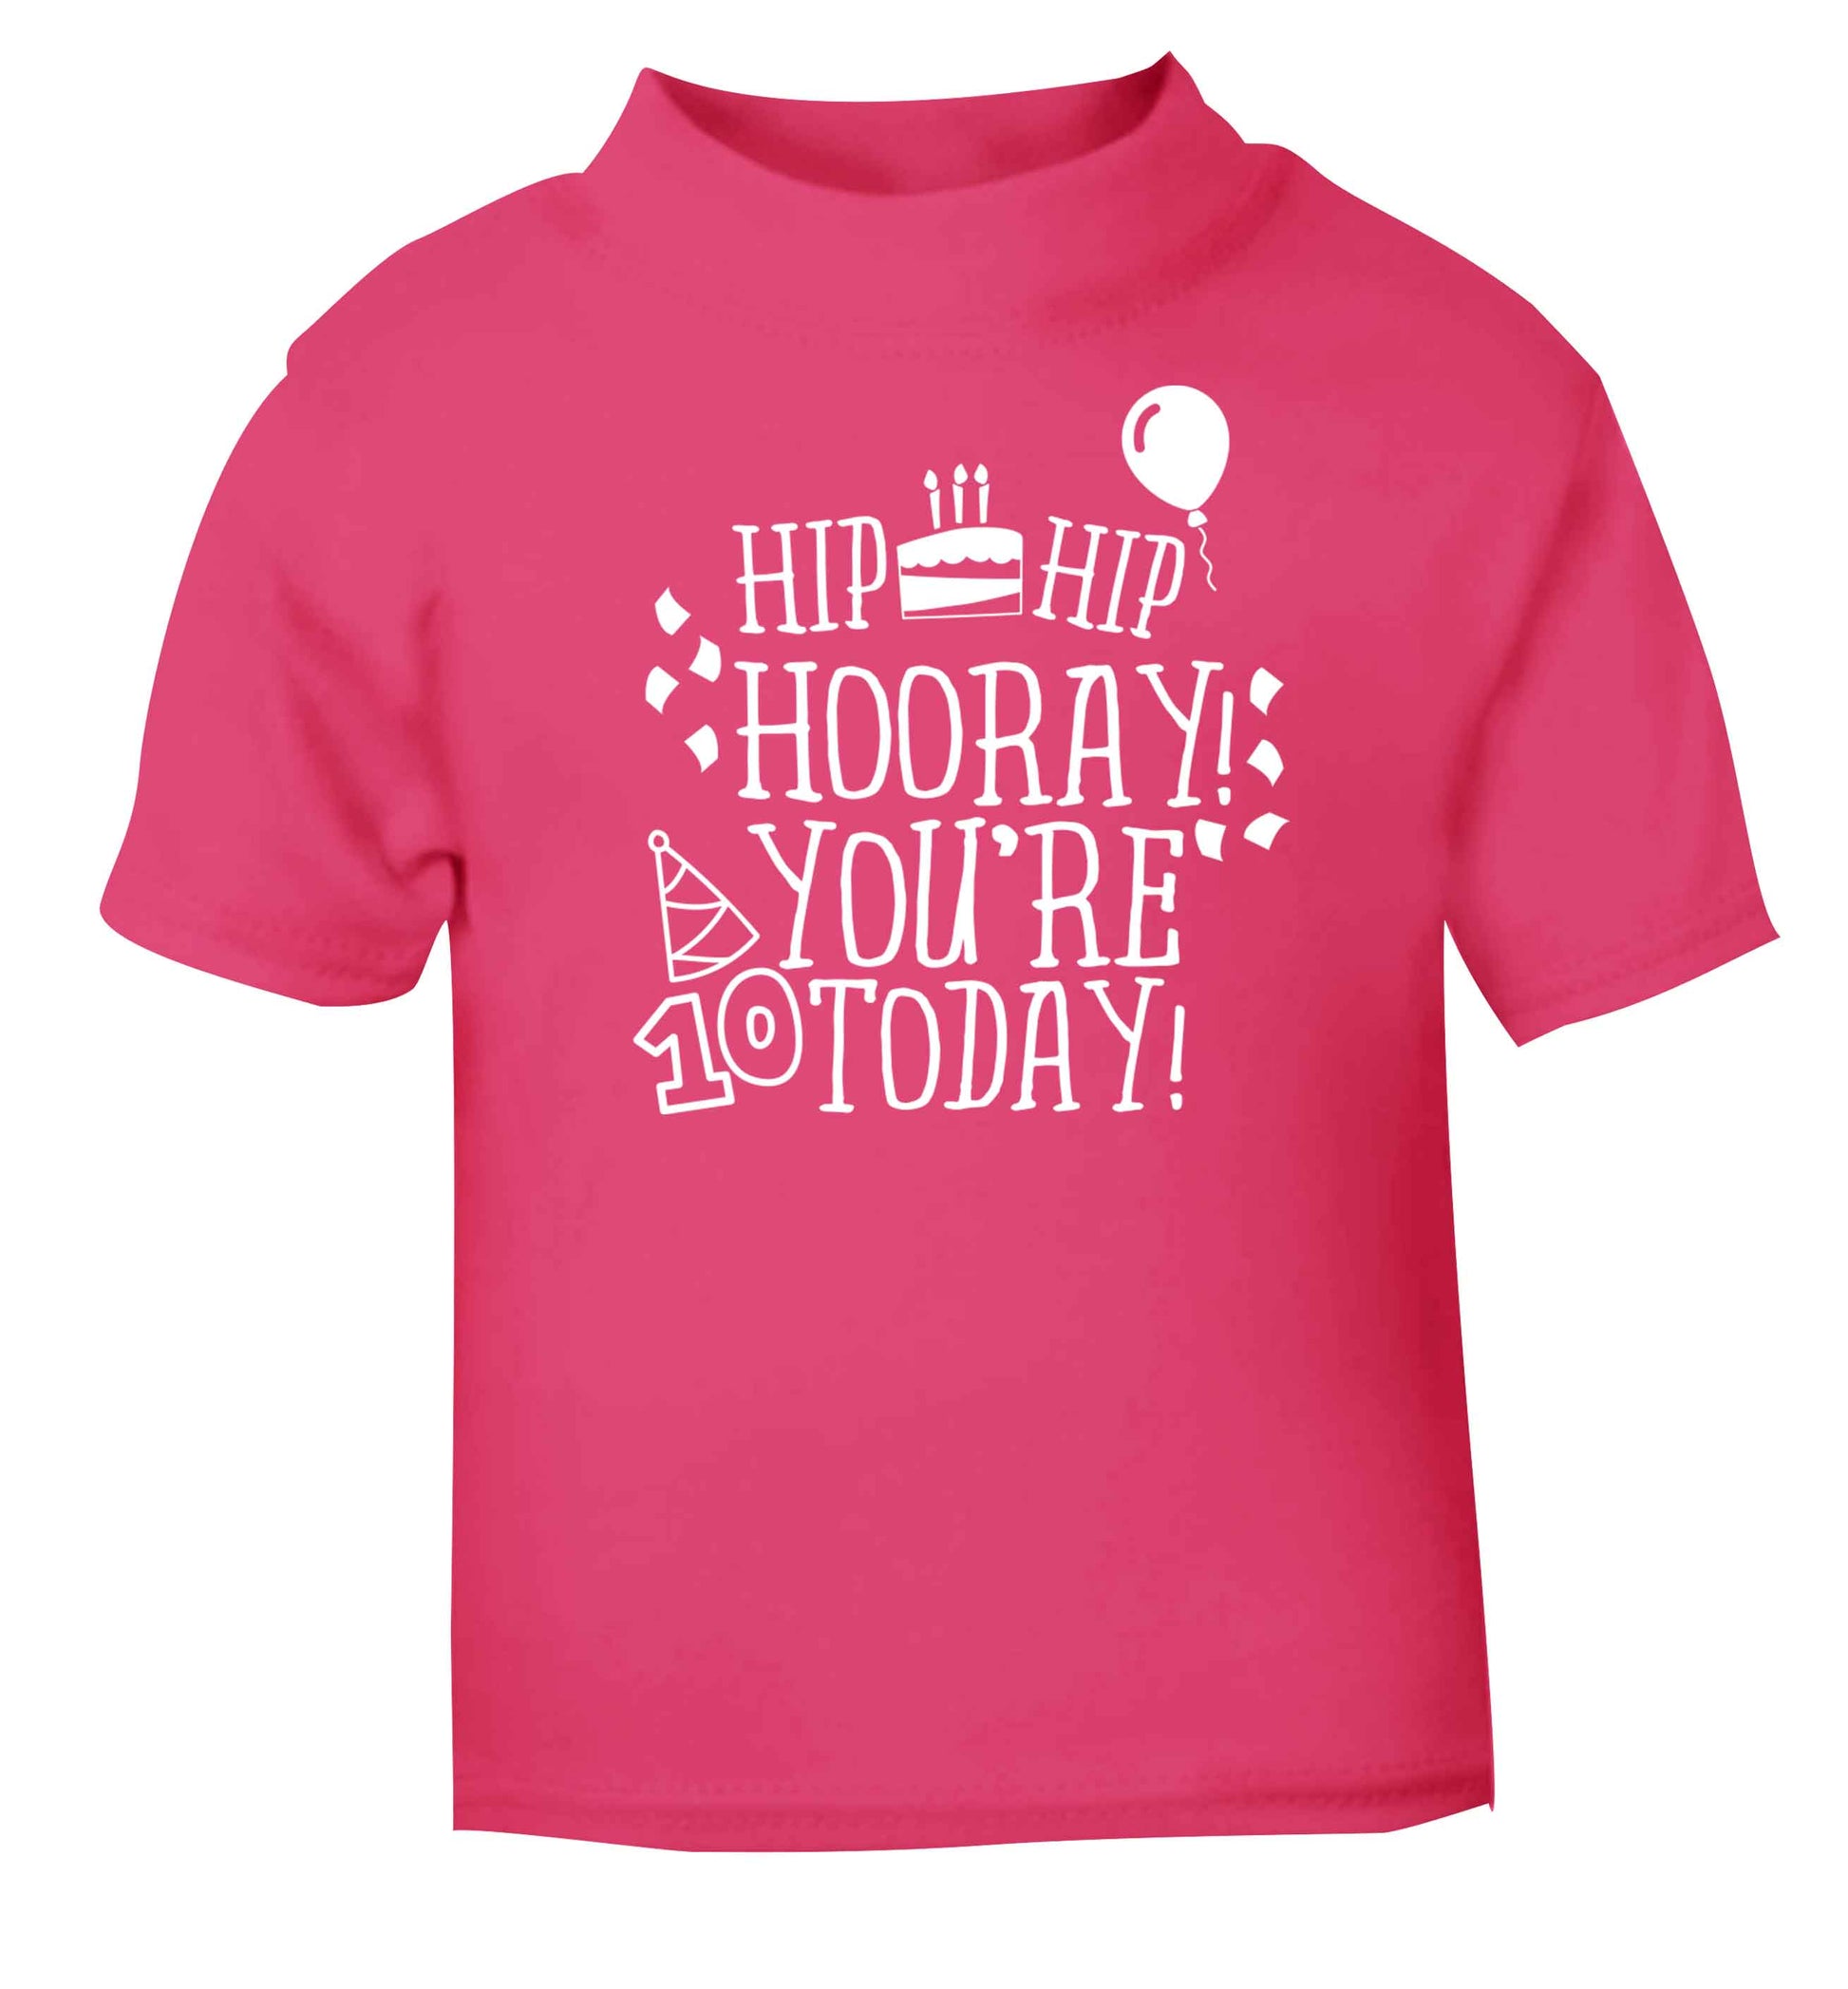 Hip hip hooray you're ten today! pink baby toddler Tshirt 2 Years